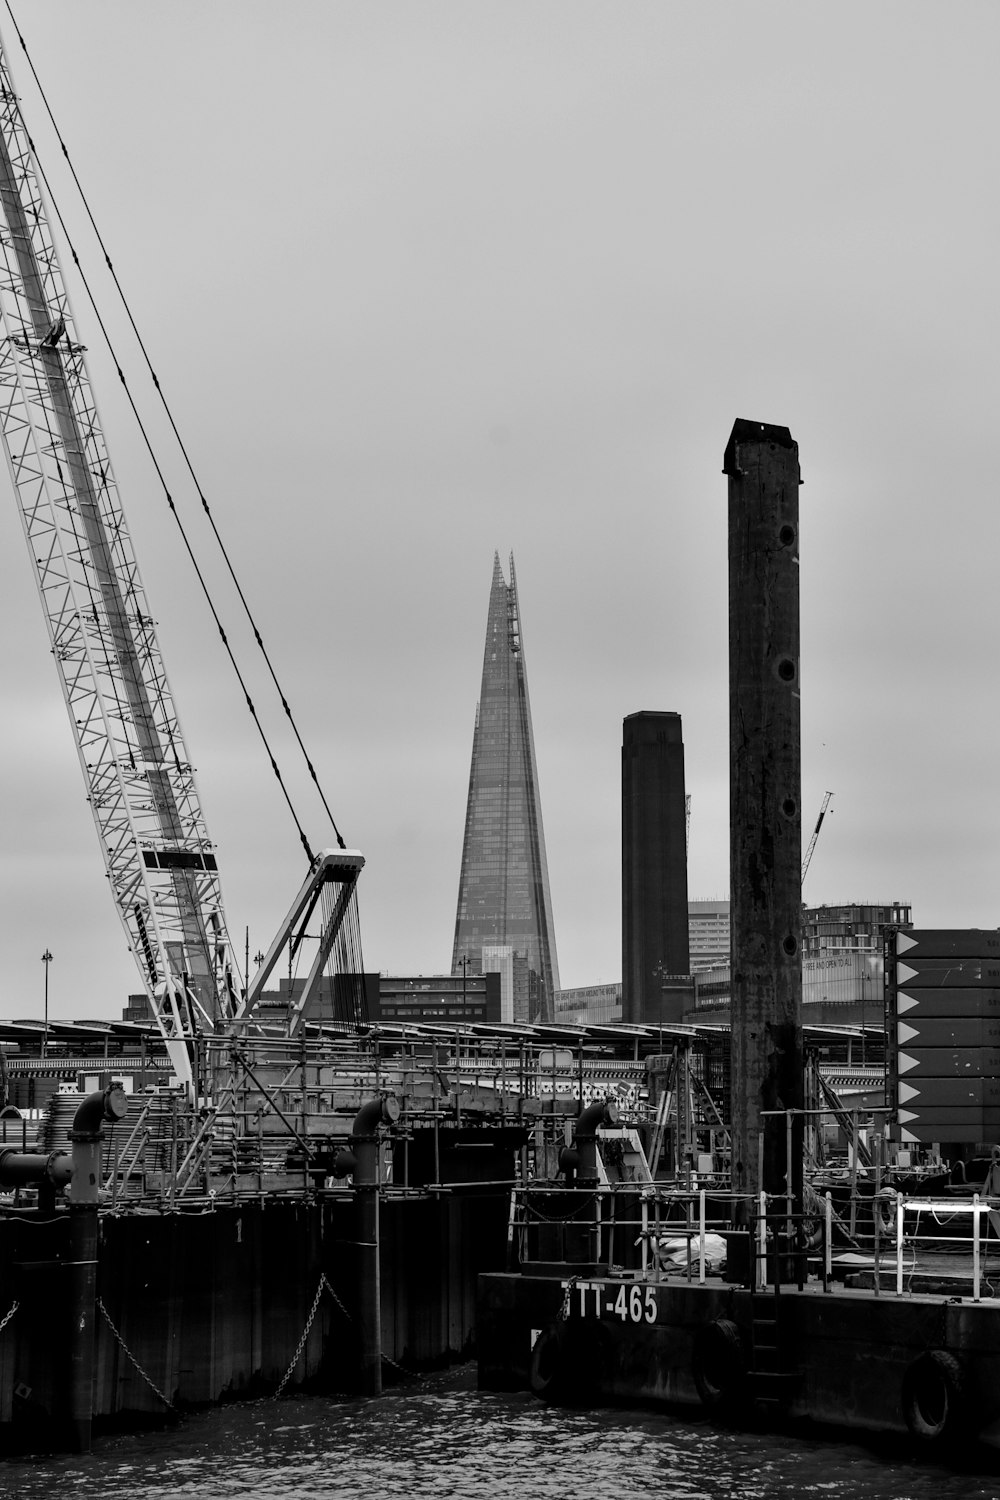 a black and white photo of a crane in a harbor